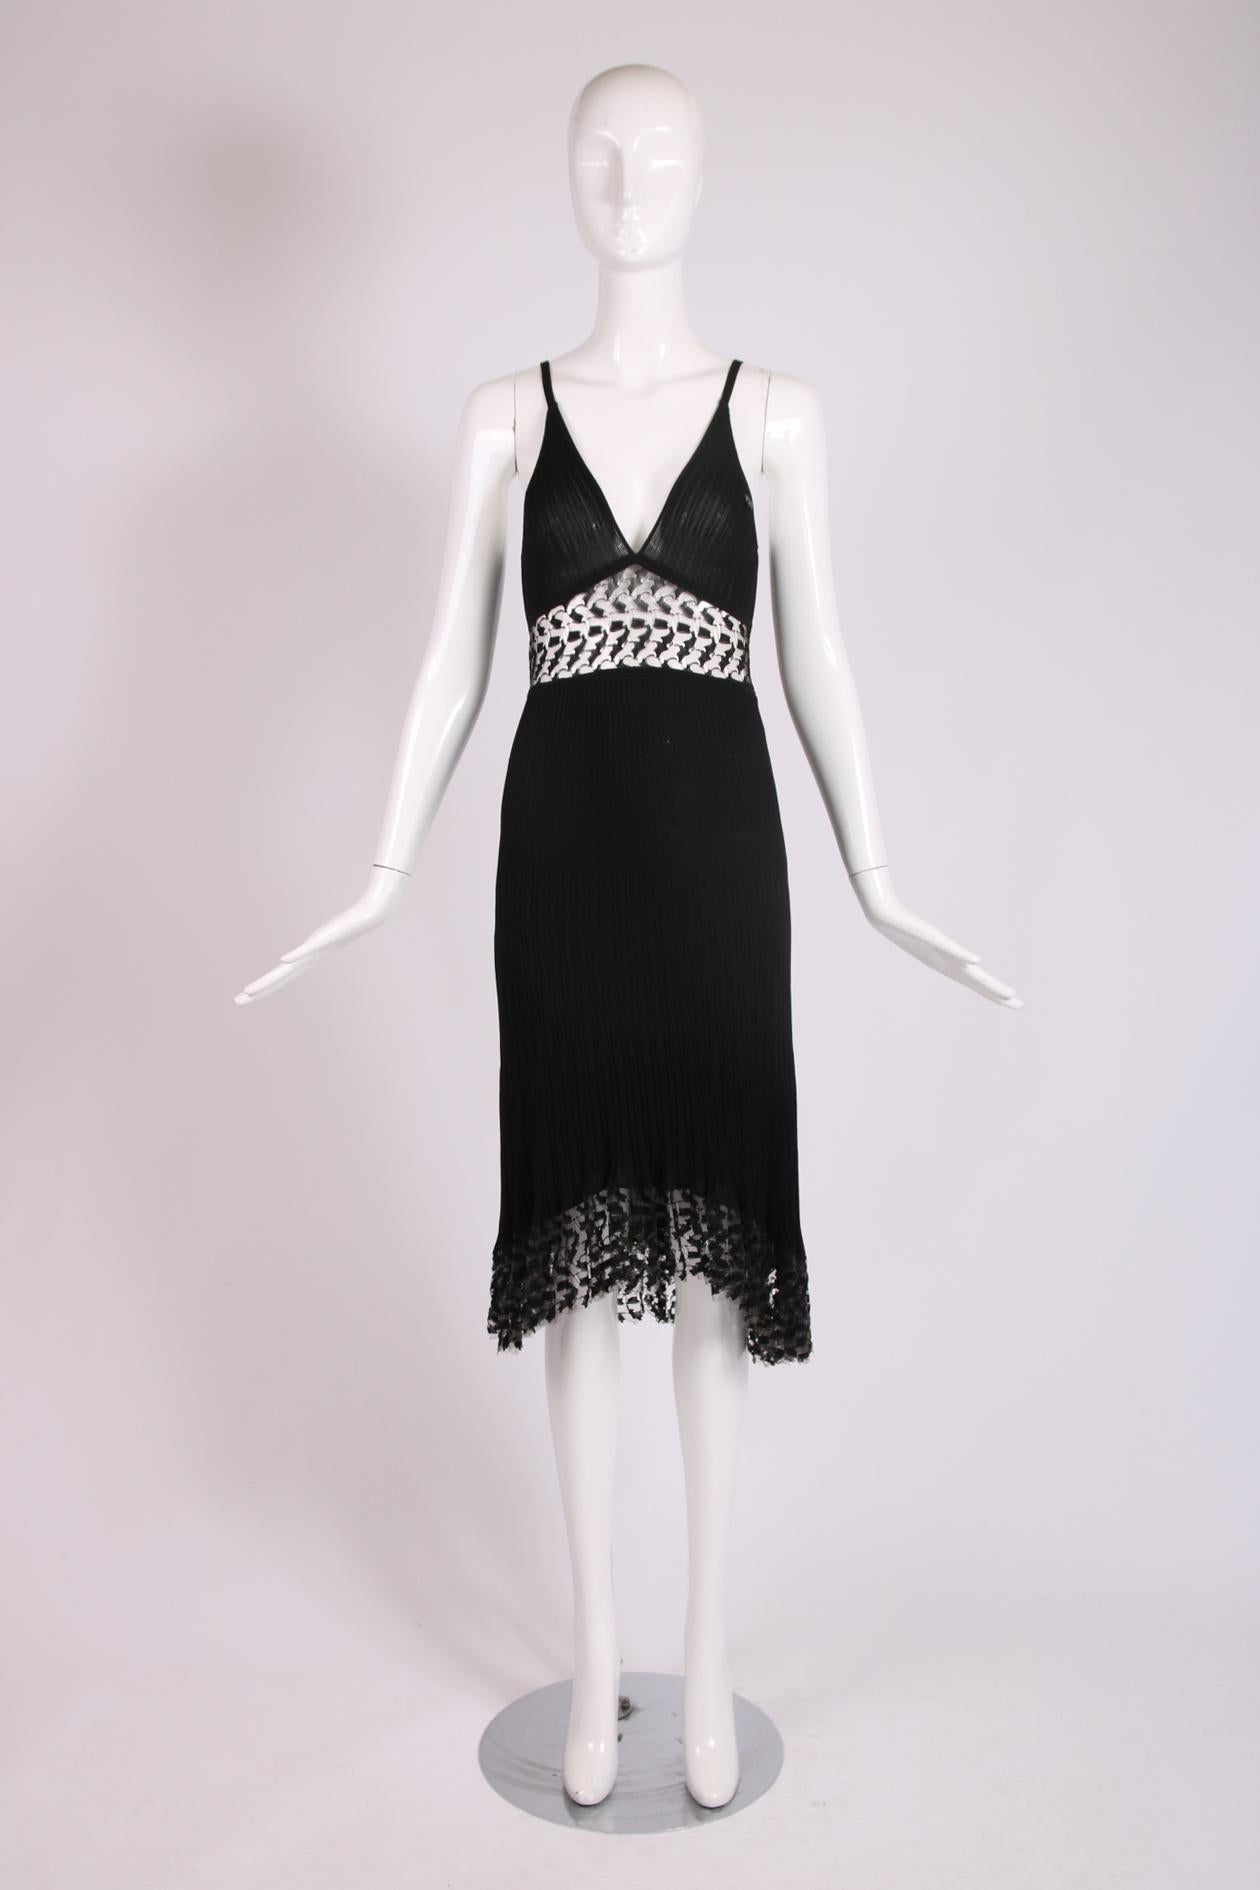 Chanel 2006 Cruise collection fitted black ribbed stretchy dress featuring a deep V-neckline and transparent lace cutouts design motif below the bust and at the flounced high-low hem. Skirt is lined at the interior. Fabric is a viscose, polyamide